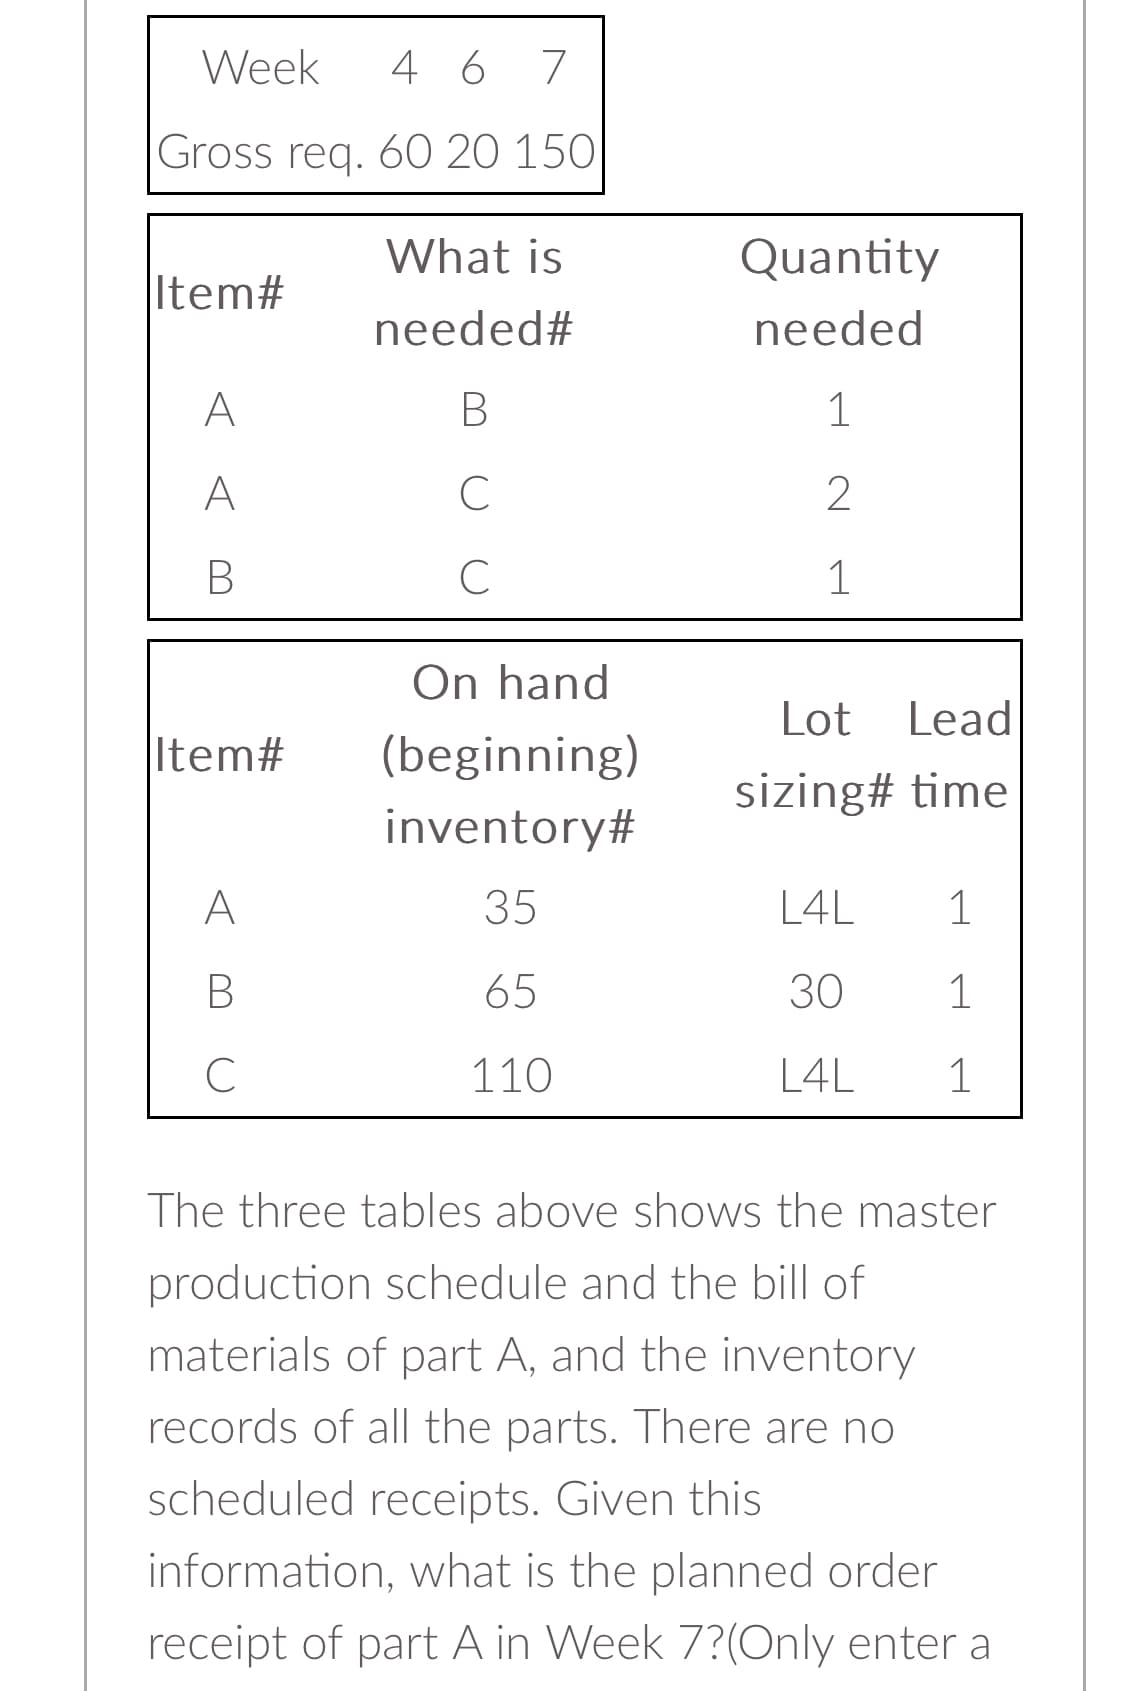 Week
4 6 7
Gross req. 60 20 150
Item#
A
A
B
Item#
A
B
C
What is
needed#
B
C
с
On hand
(beginning)
inventory#
35
65
110
Quantity
needed
1
2
1
Lot
Lead
sizing# time
L4L
30
L4L
1
1
1
The three tables above shows the master
production schedule and the bill of
materials of part A, and the inventory
records of all the parts. There are no
scheduled receipts. Given this
information, what is the planned order
receipt of part A in Week 7?(Only enter a